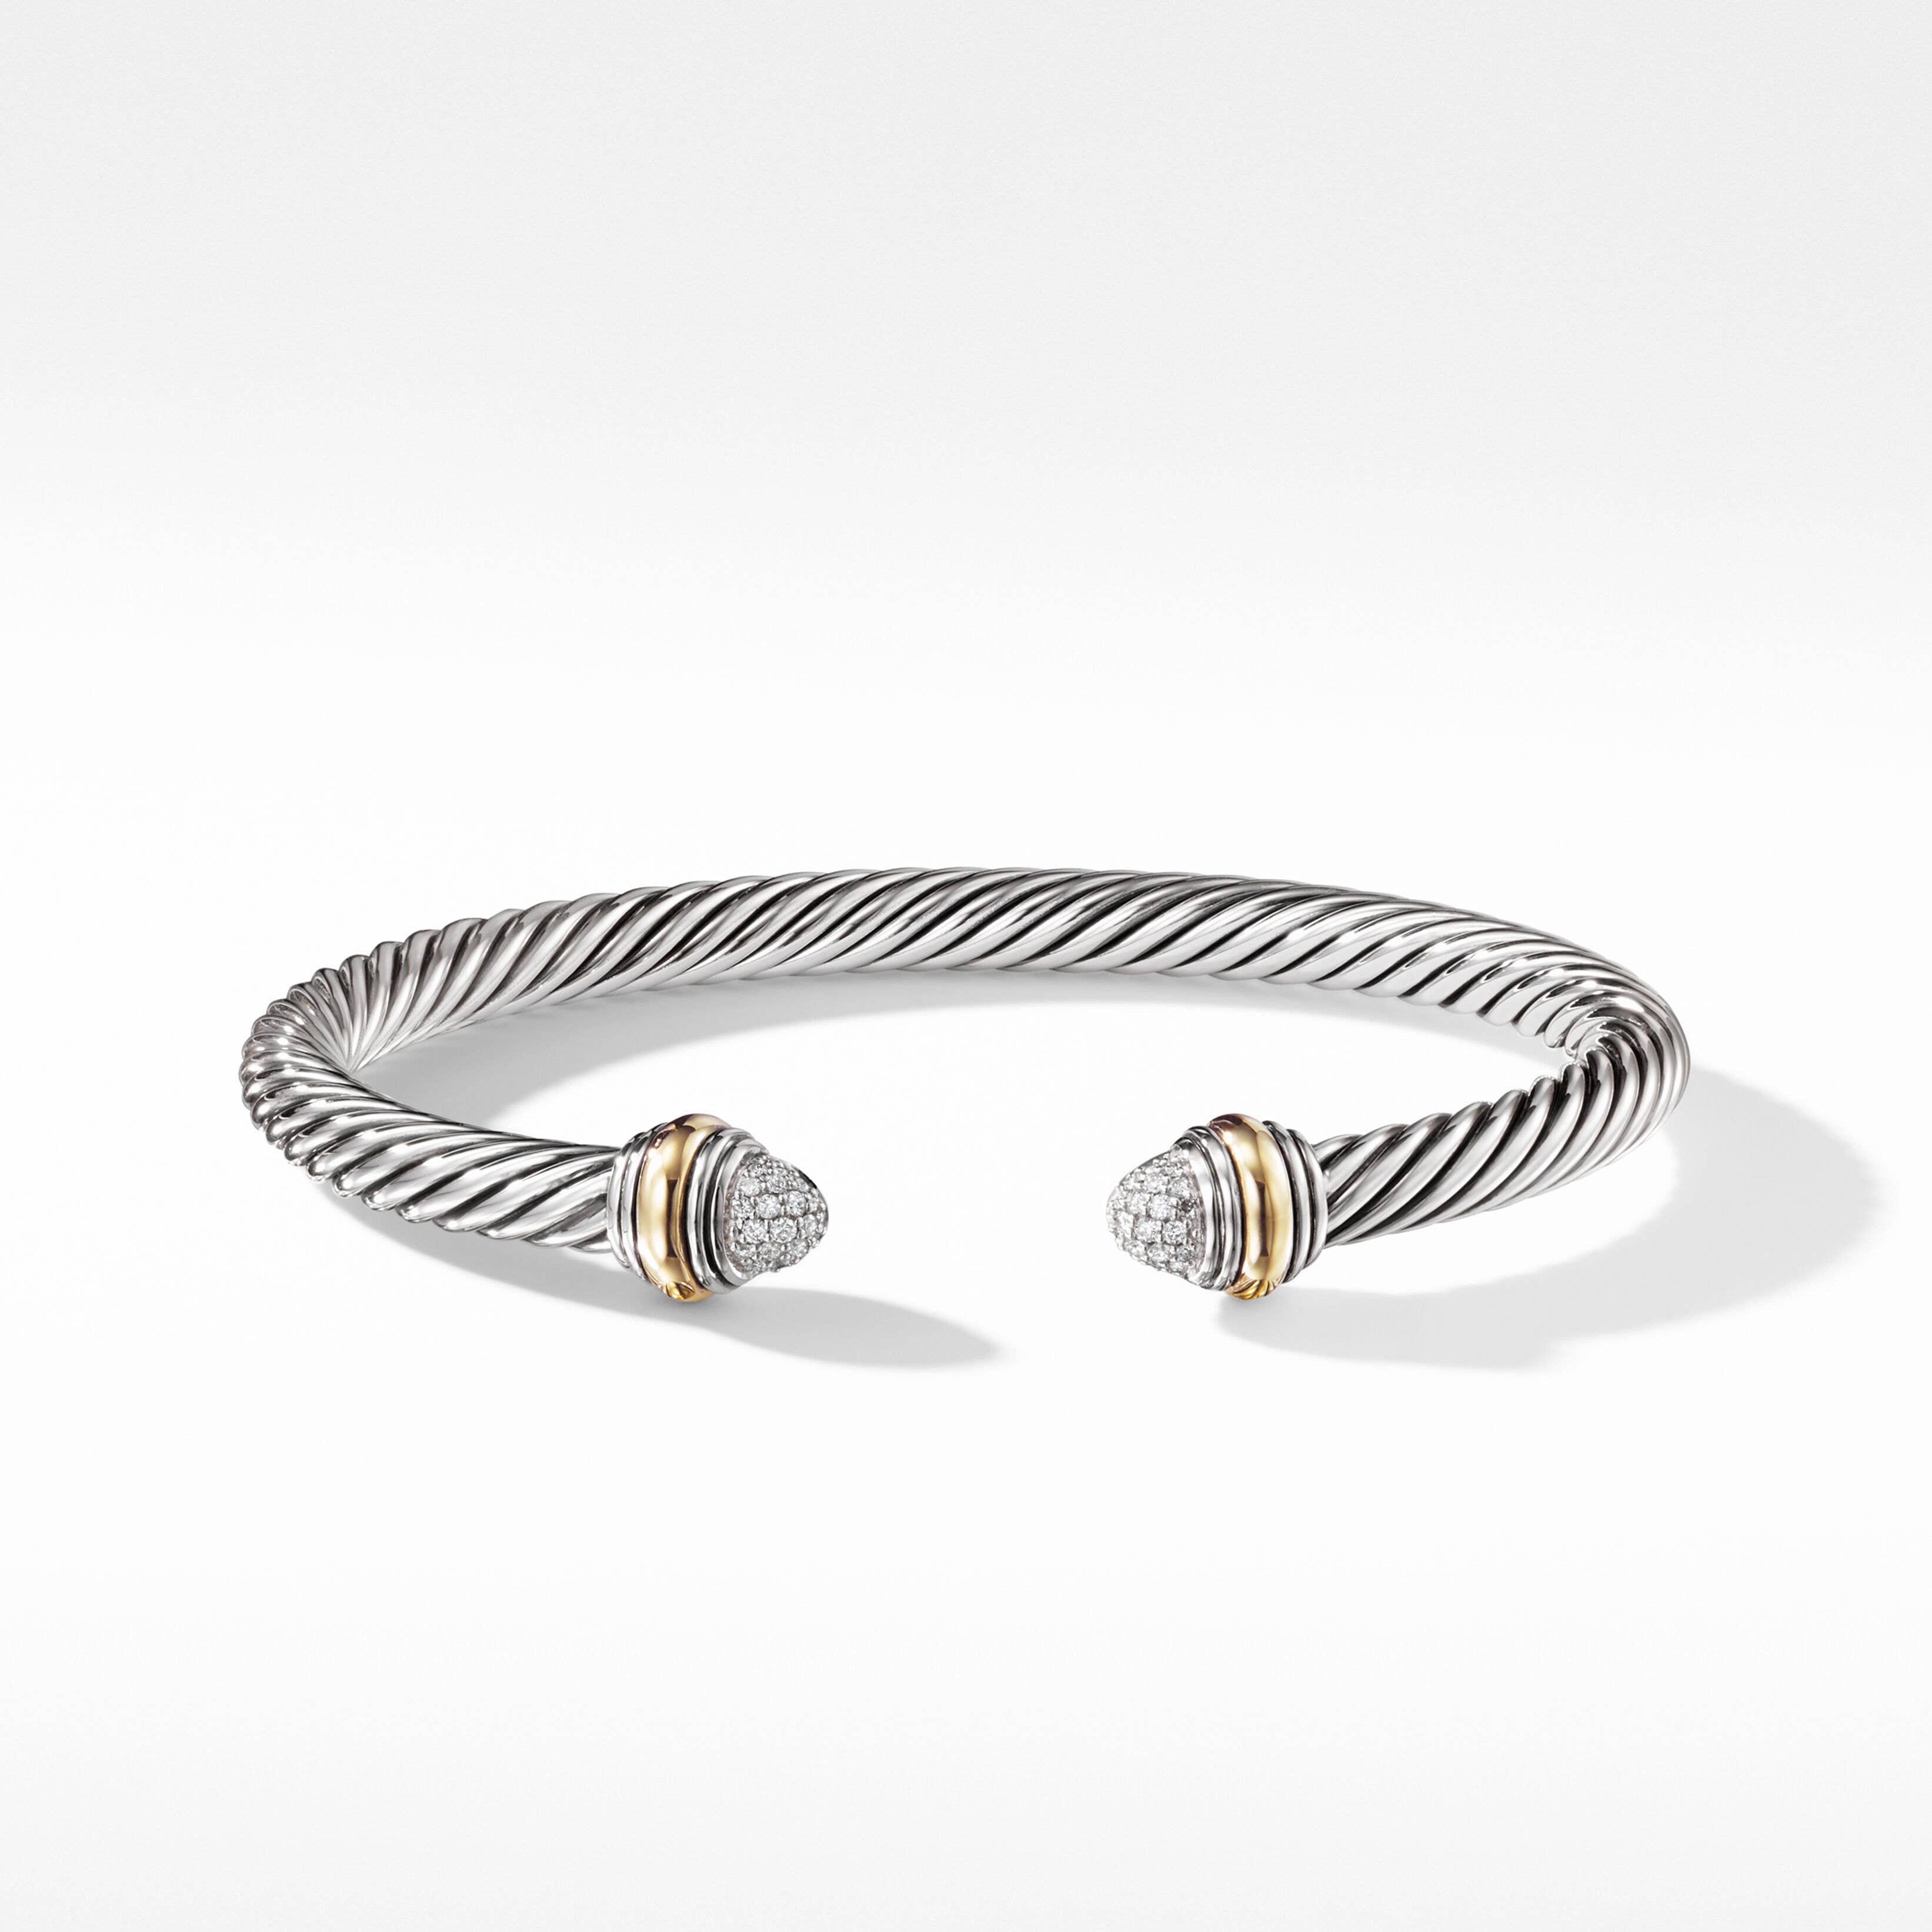 Cable Classics Bracelet in Sterling Silver with Pavé Diamond Domes and 14K Yellow Gold